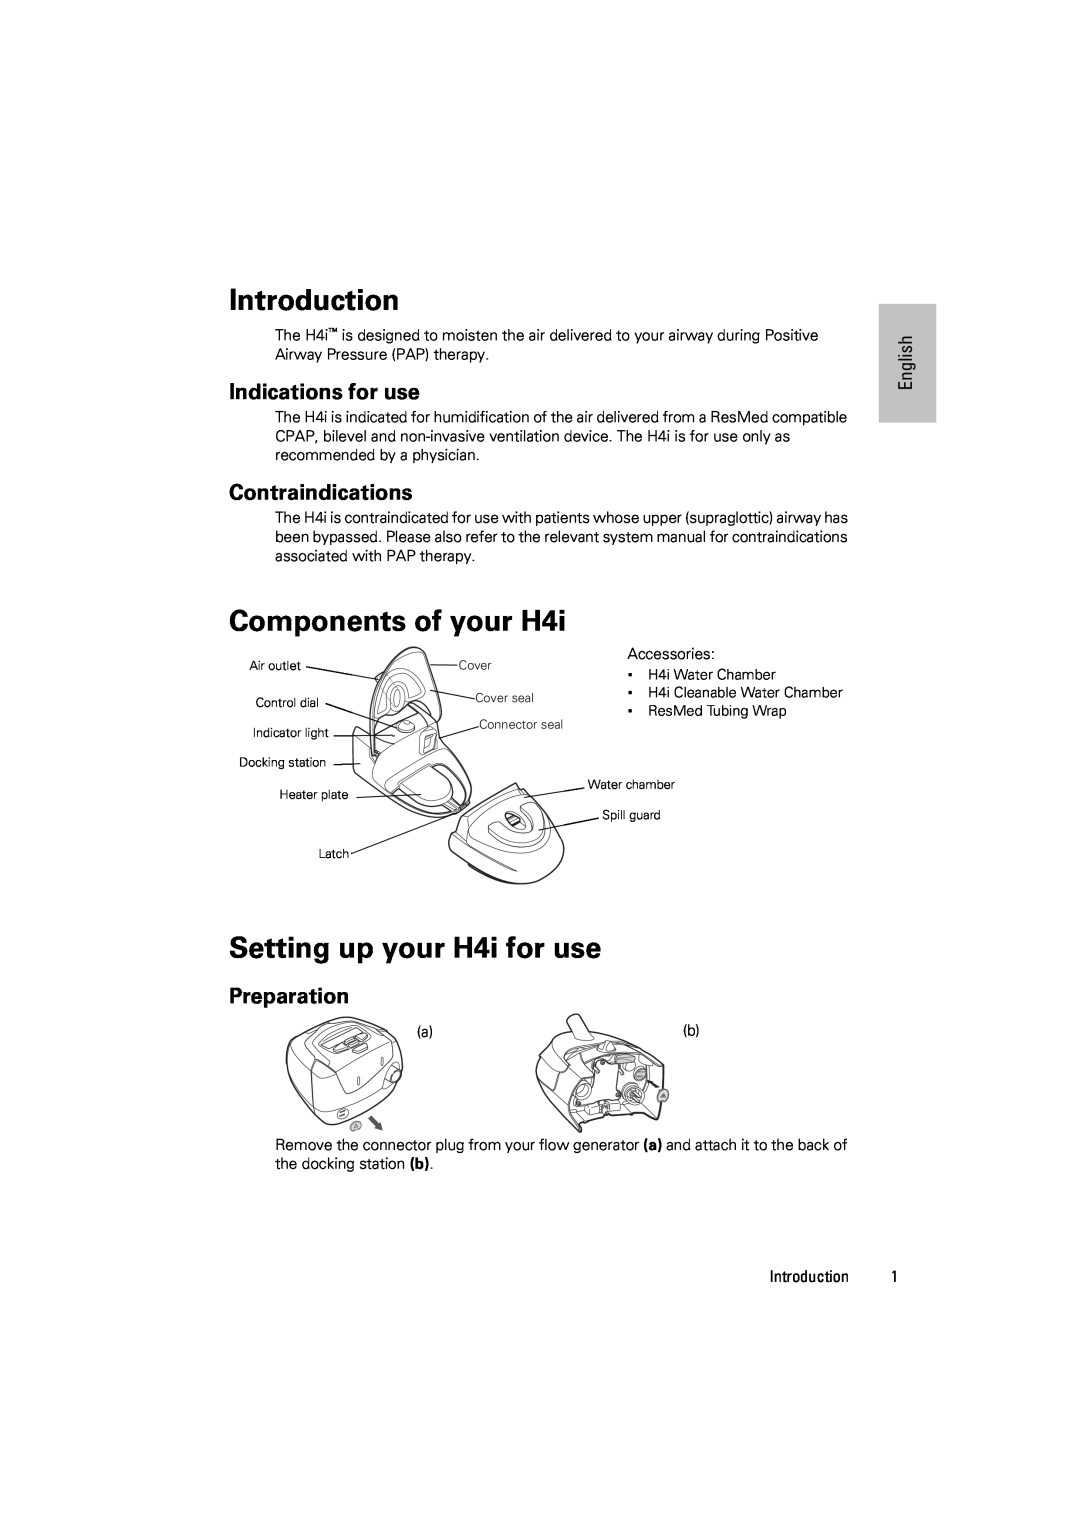 ResMed 248672 Introduction, Components of your H4i, Setting up your H4i for use, Indications for use, Contraindications 